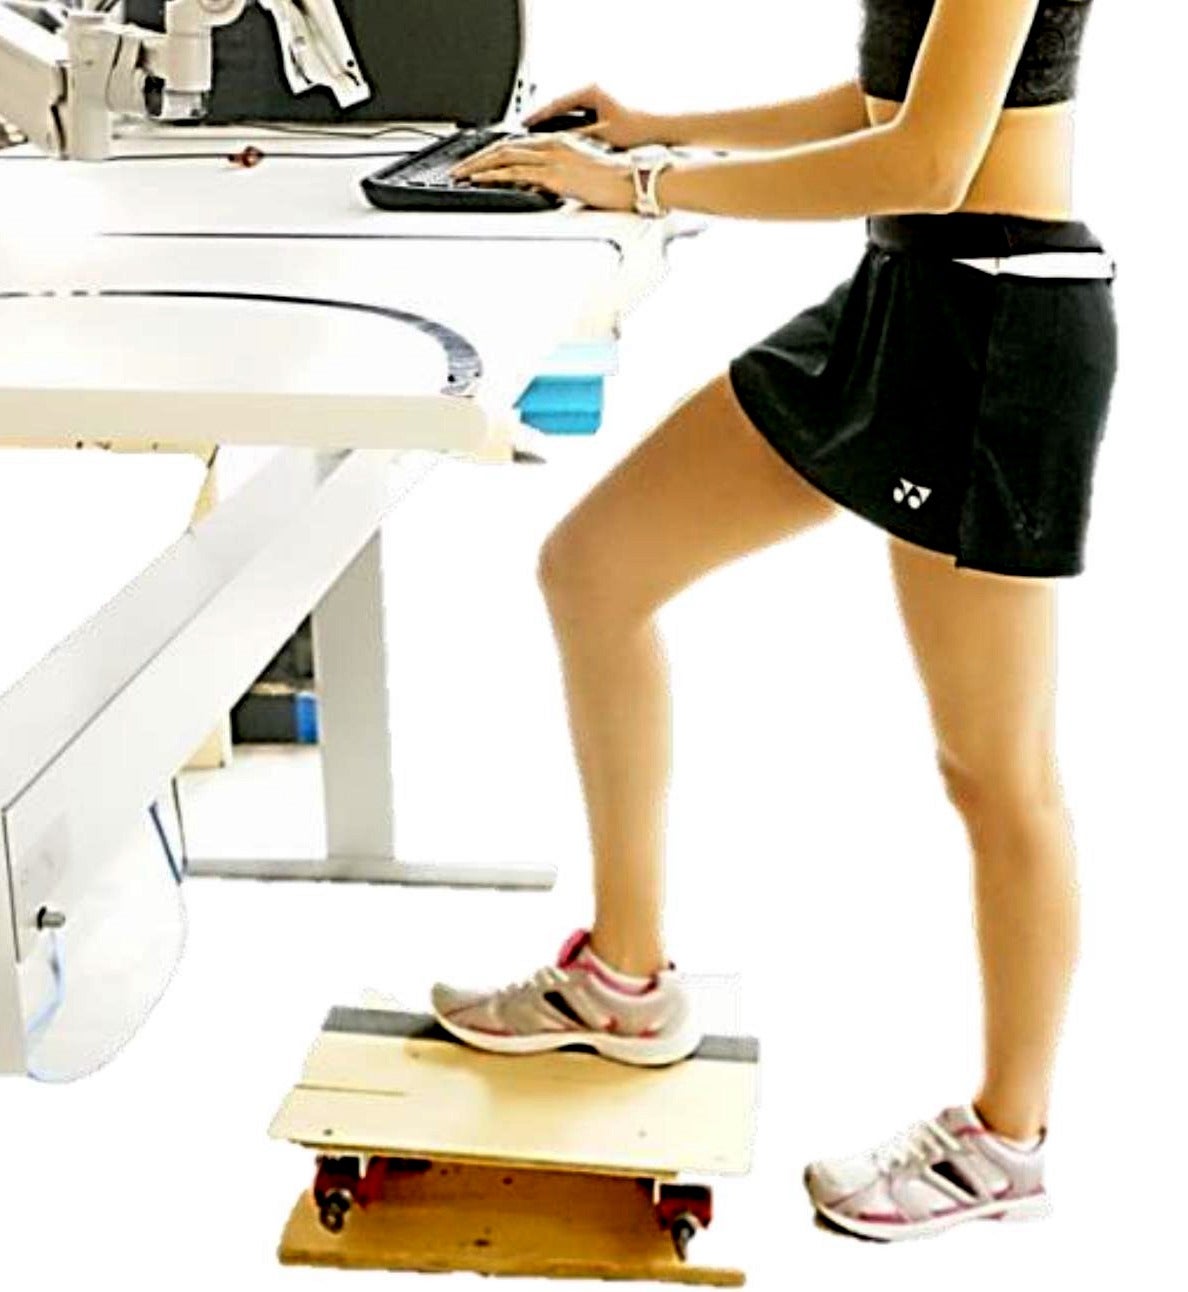 Woman at standing desk with foot on footrest